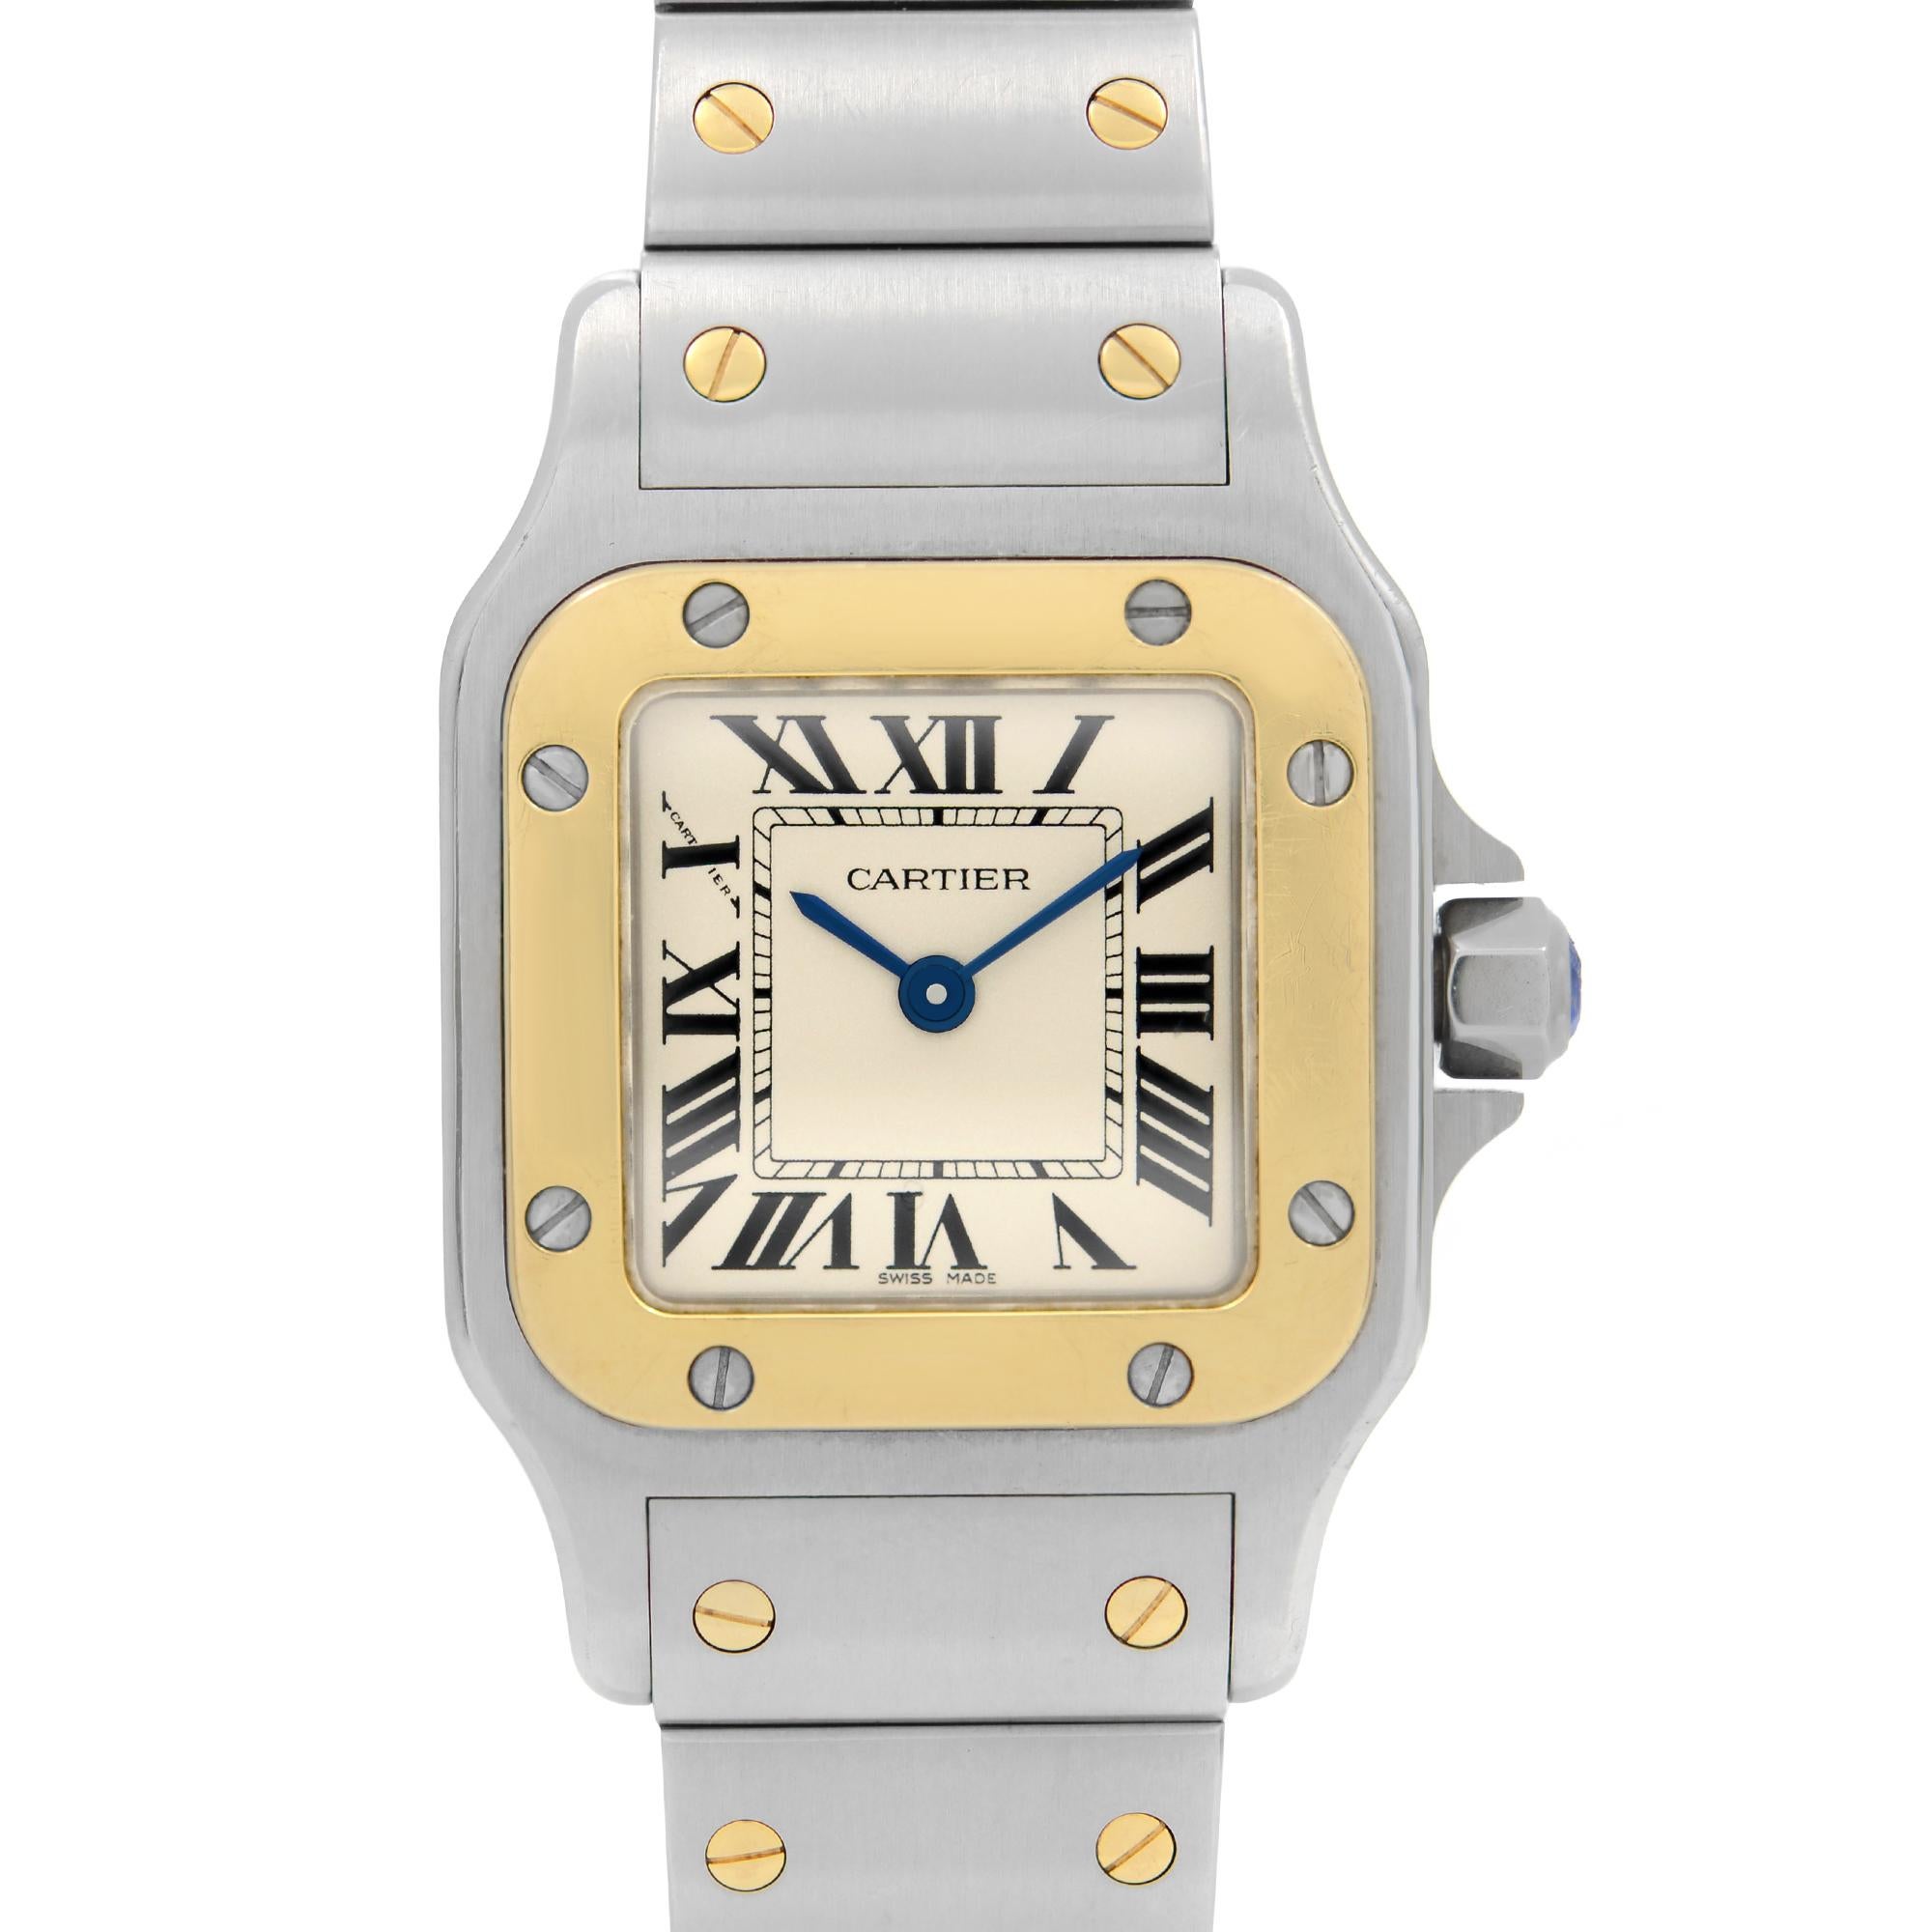 Pre Owned Cartier Santos Galbee Stainless Steel Gold Cream Dial Ladies Quartz Watch 1567. This Beautiful Timepiece is Powered by Quartz (Battery) Movement And Features: Stainless Steel Case with a Stainless Steel Bracelet with 2 Gold Screw-on Each